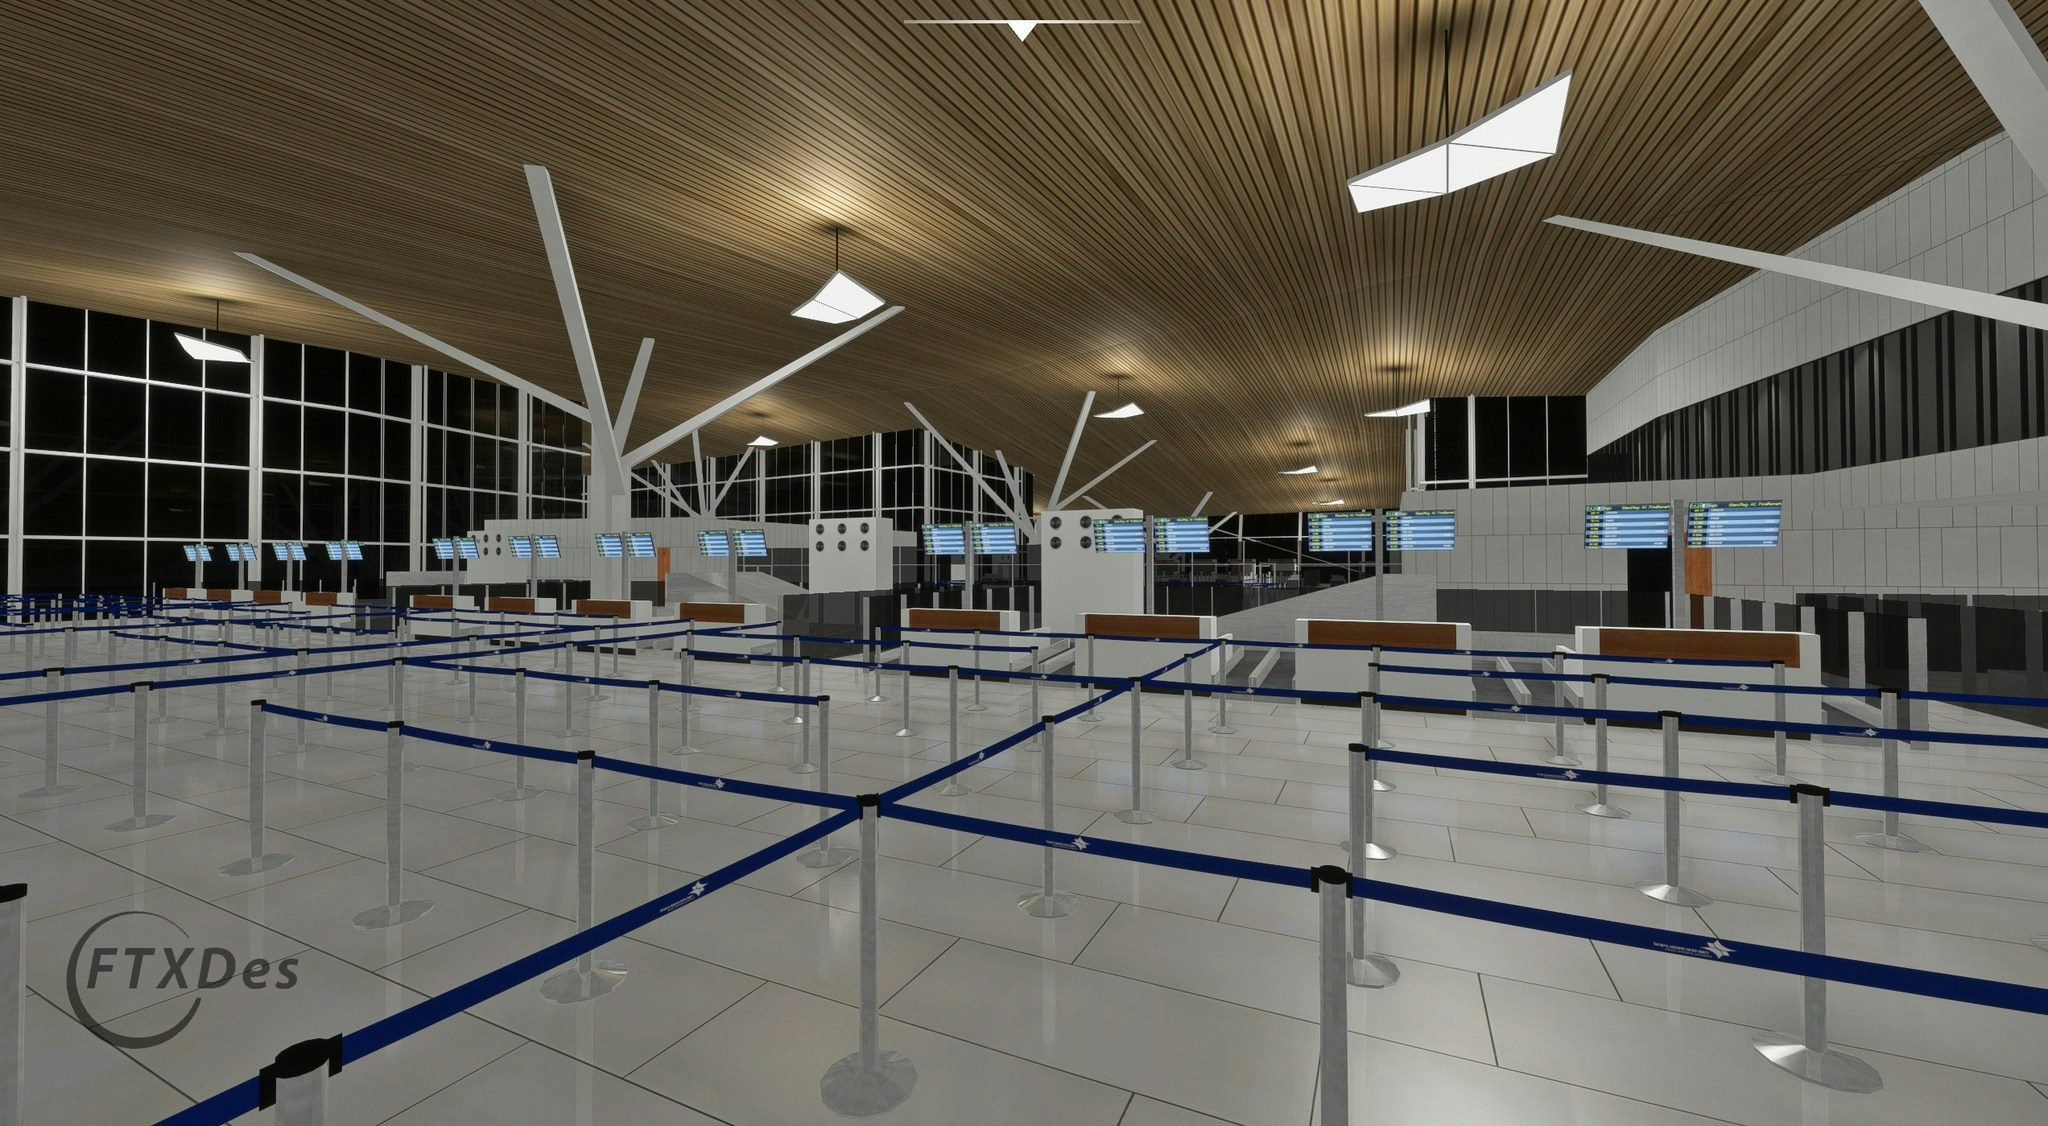 FTXDes Previews Eilat Ramon Airport for MSFS